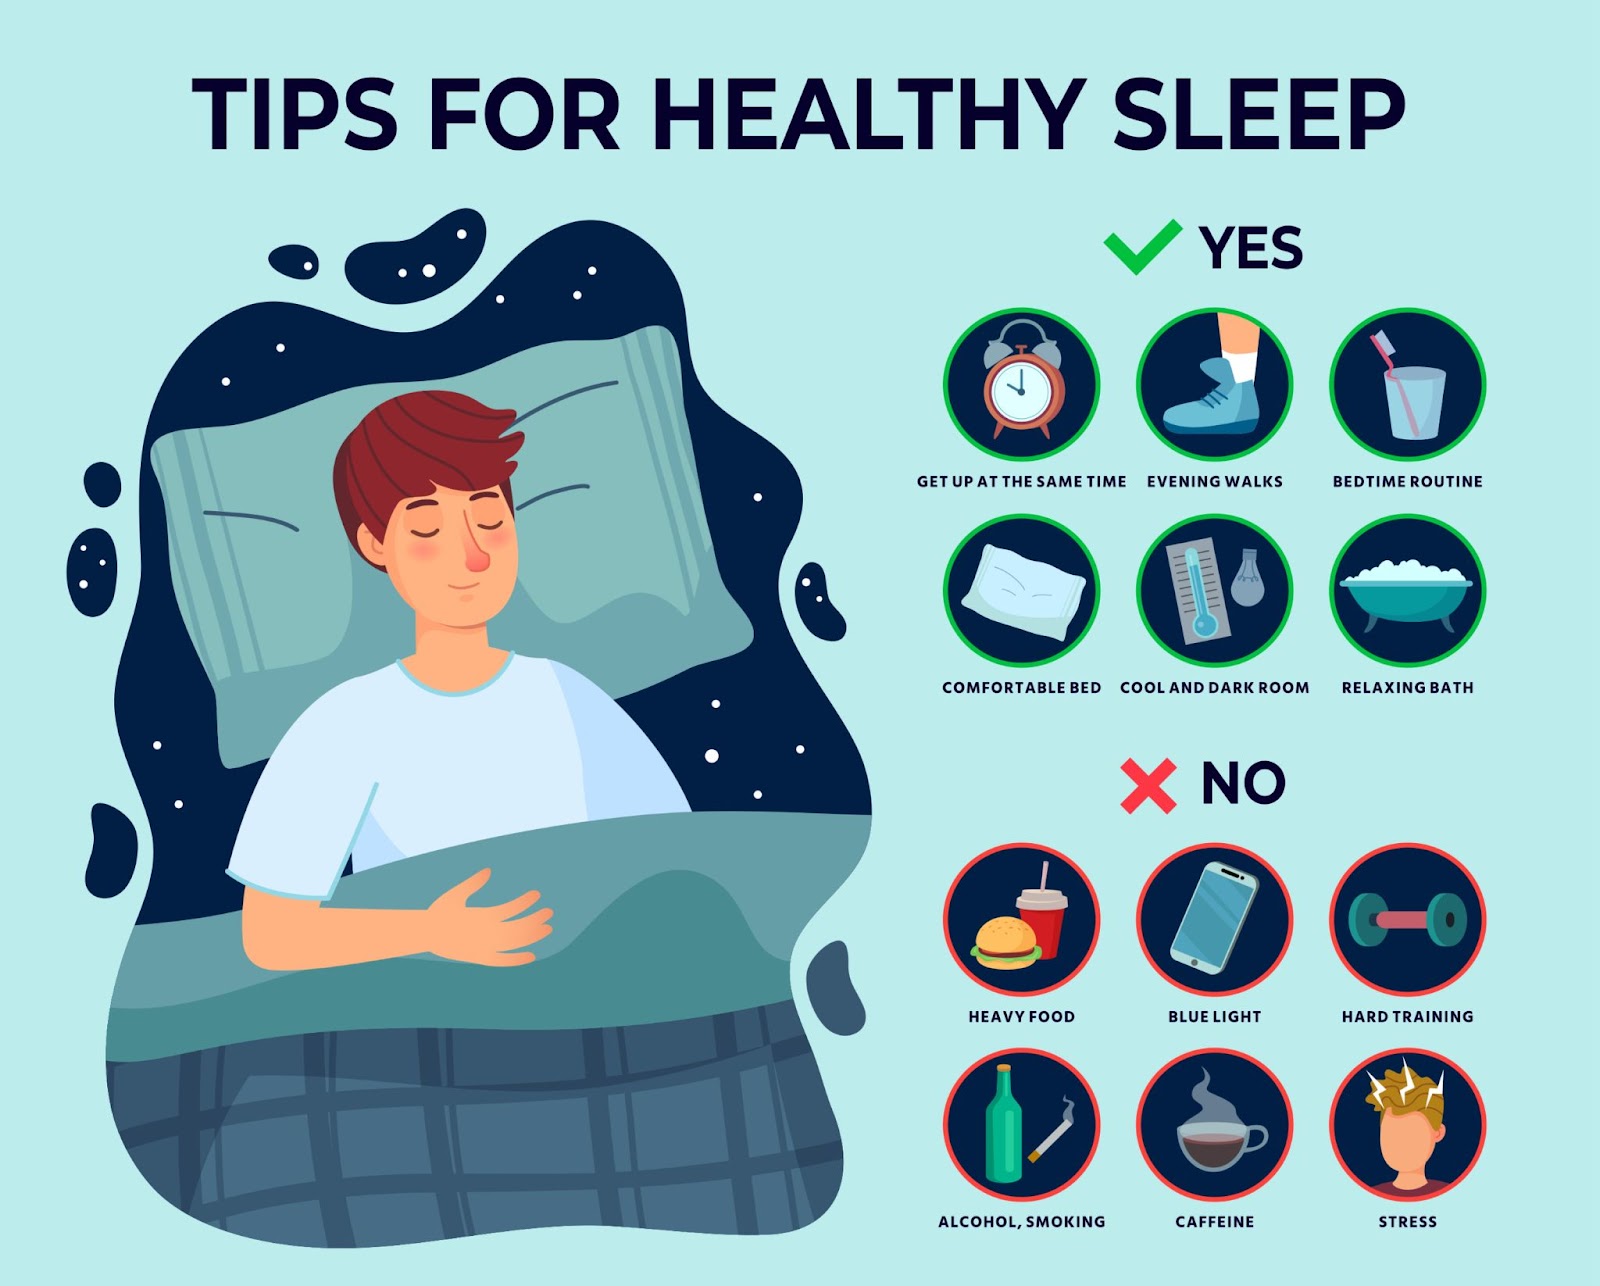 Studies have shown that getting adequate sleep each night can help to prevent Alzheimer’s disease naturally.